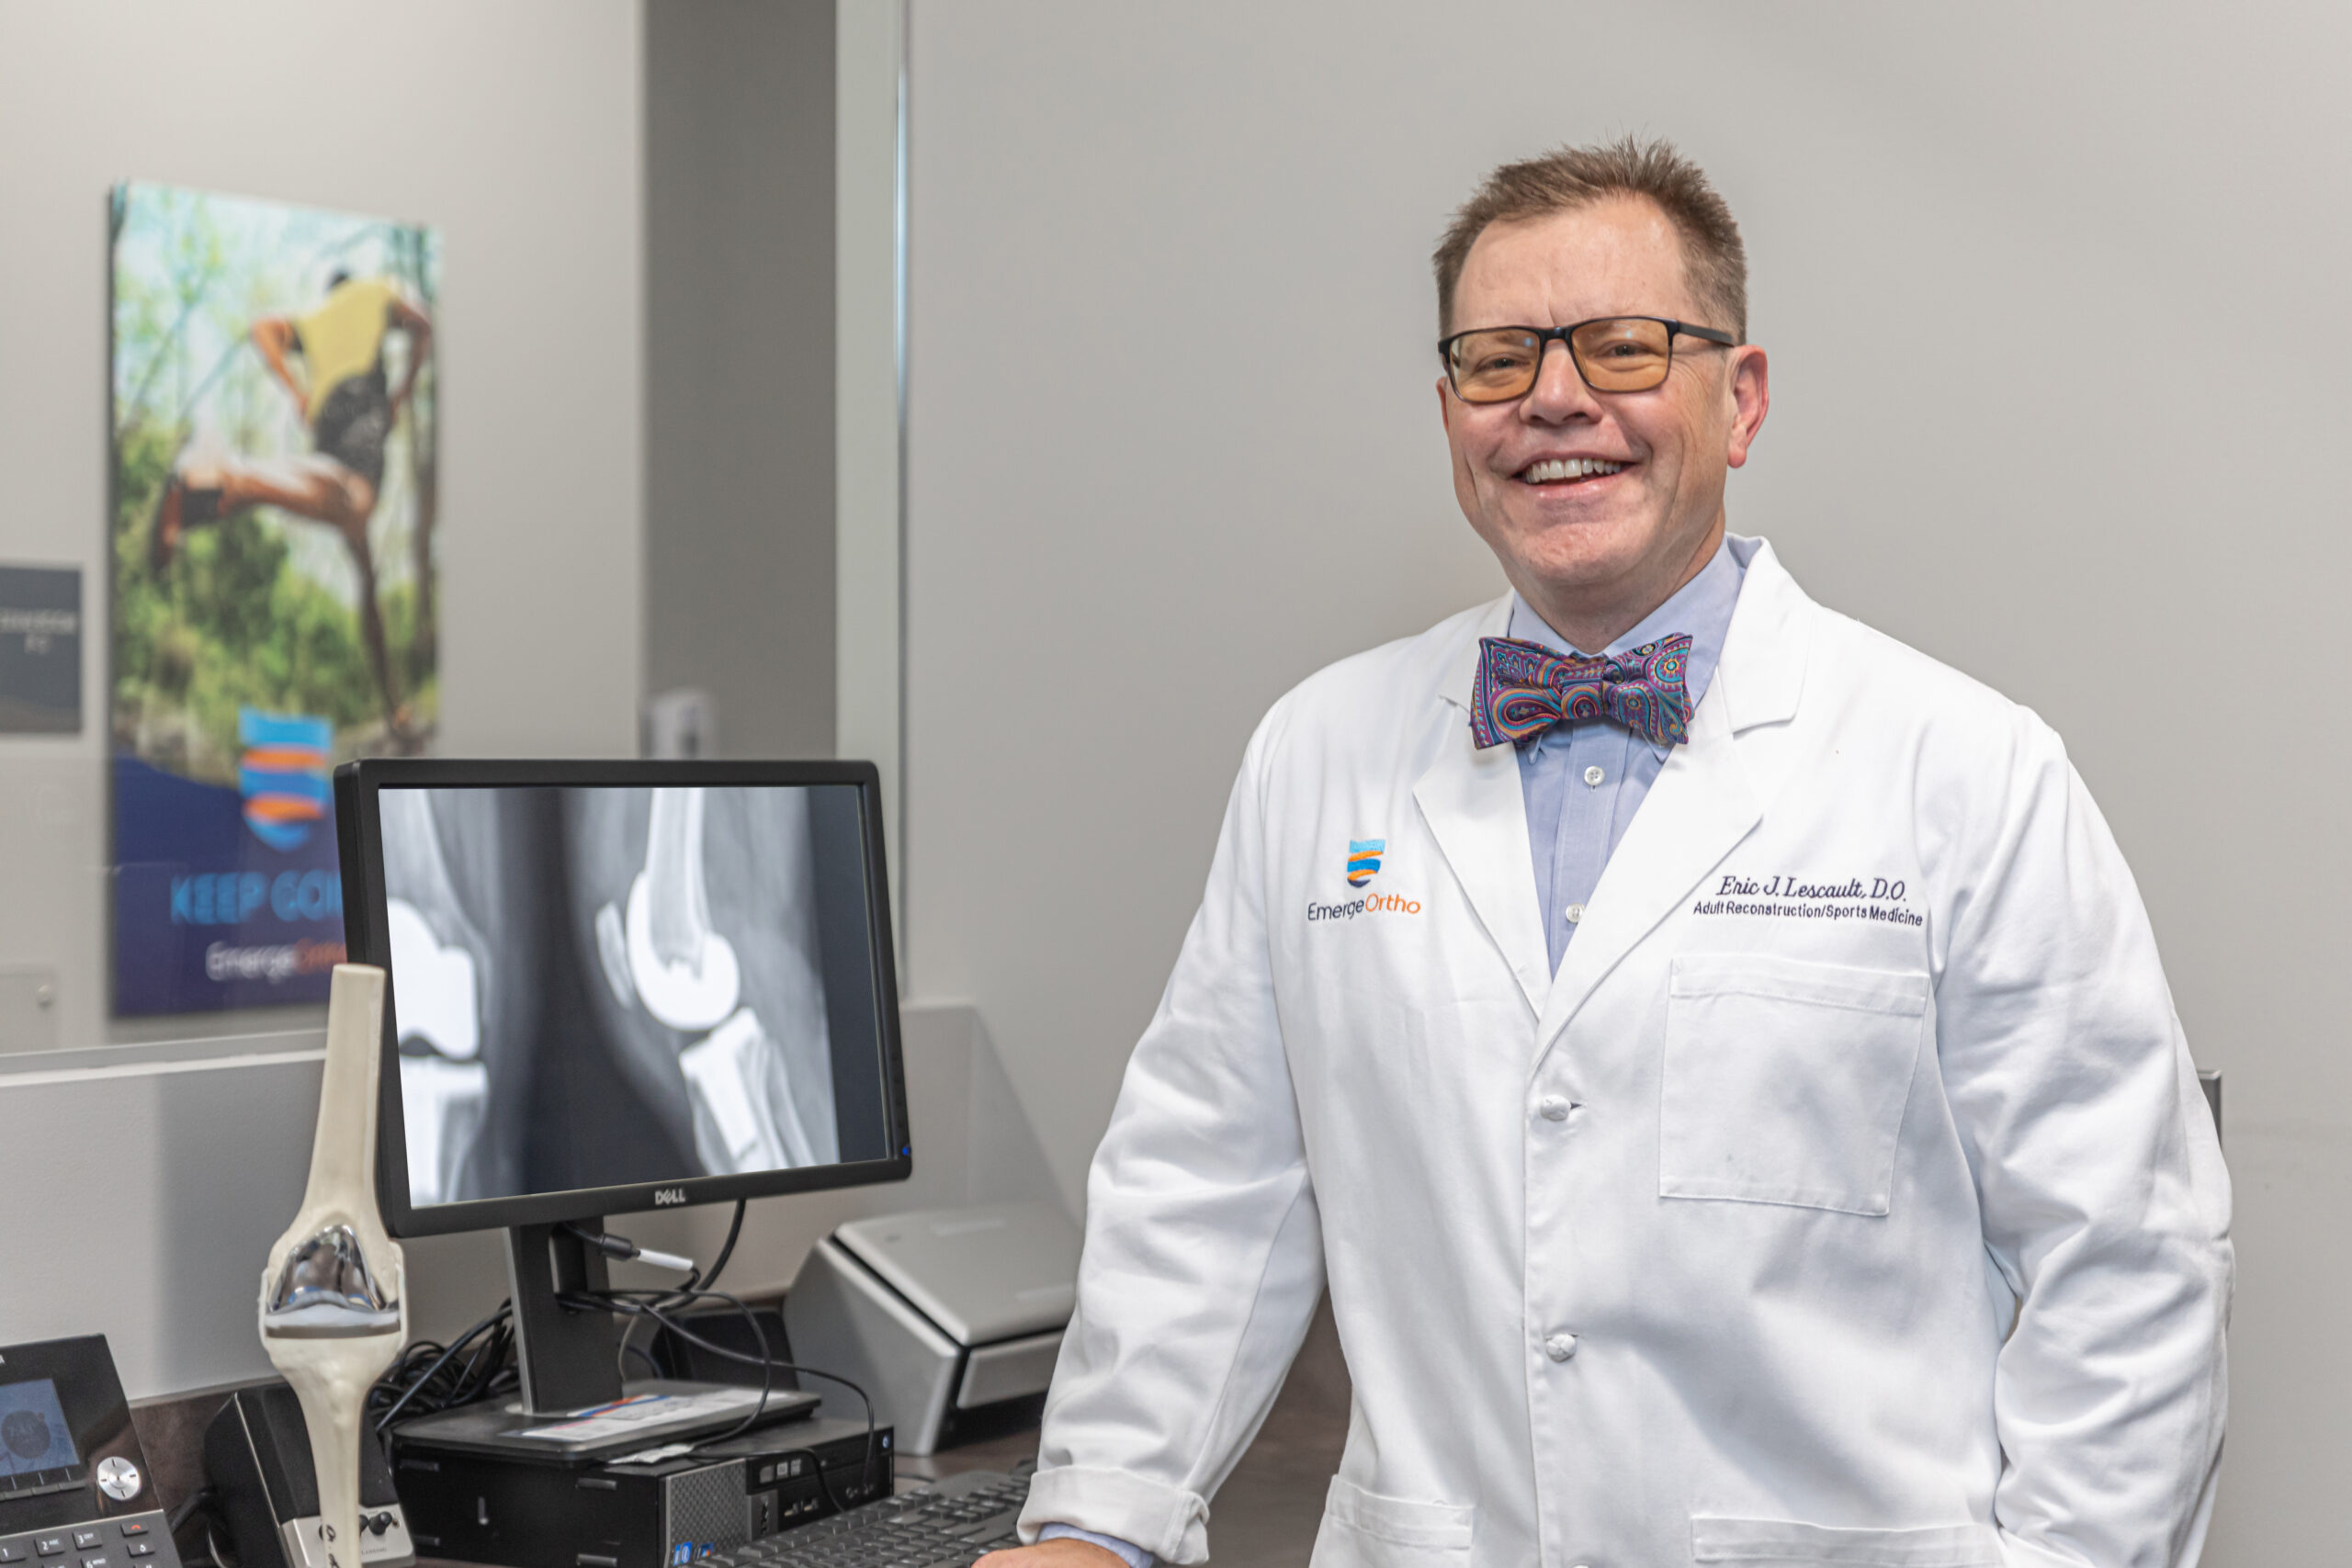 Dr. Lescault Reaches Grand Milestone, Completing 1,000 Robotic Joint Replacements in 2.5 Years